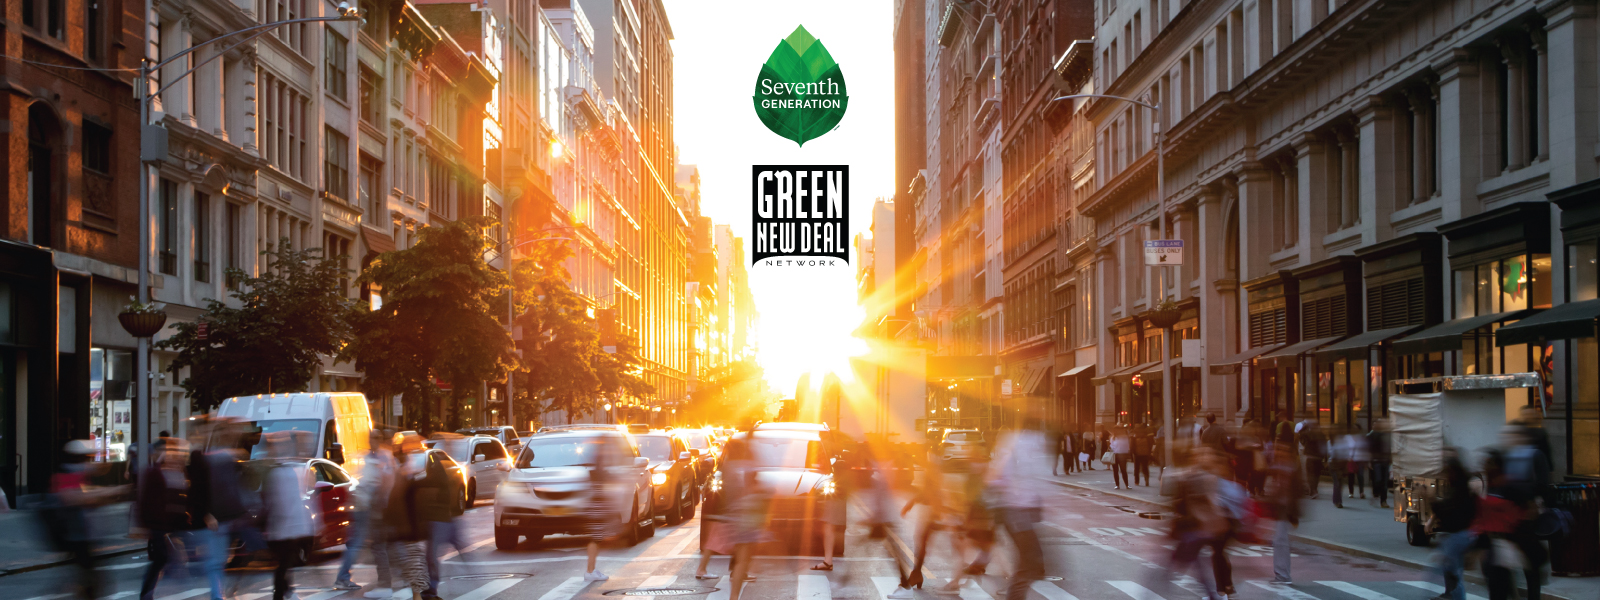 Green New Deal Network and Seventh Generation Logos